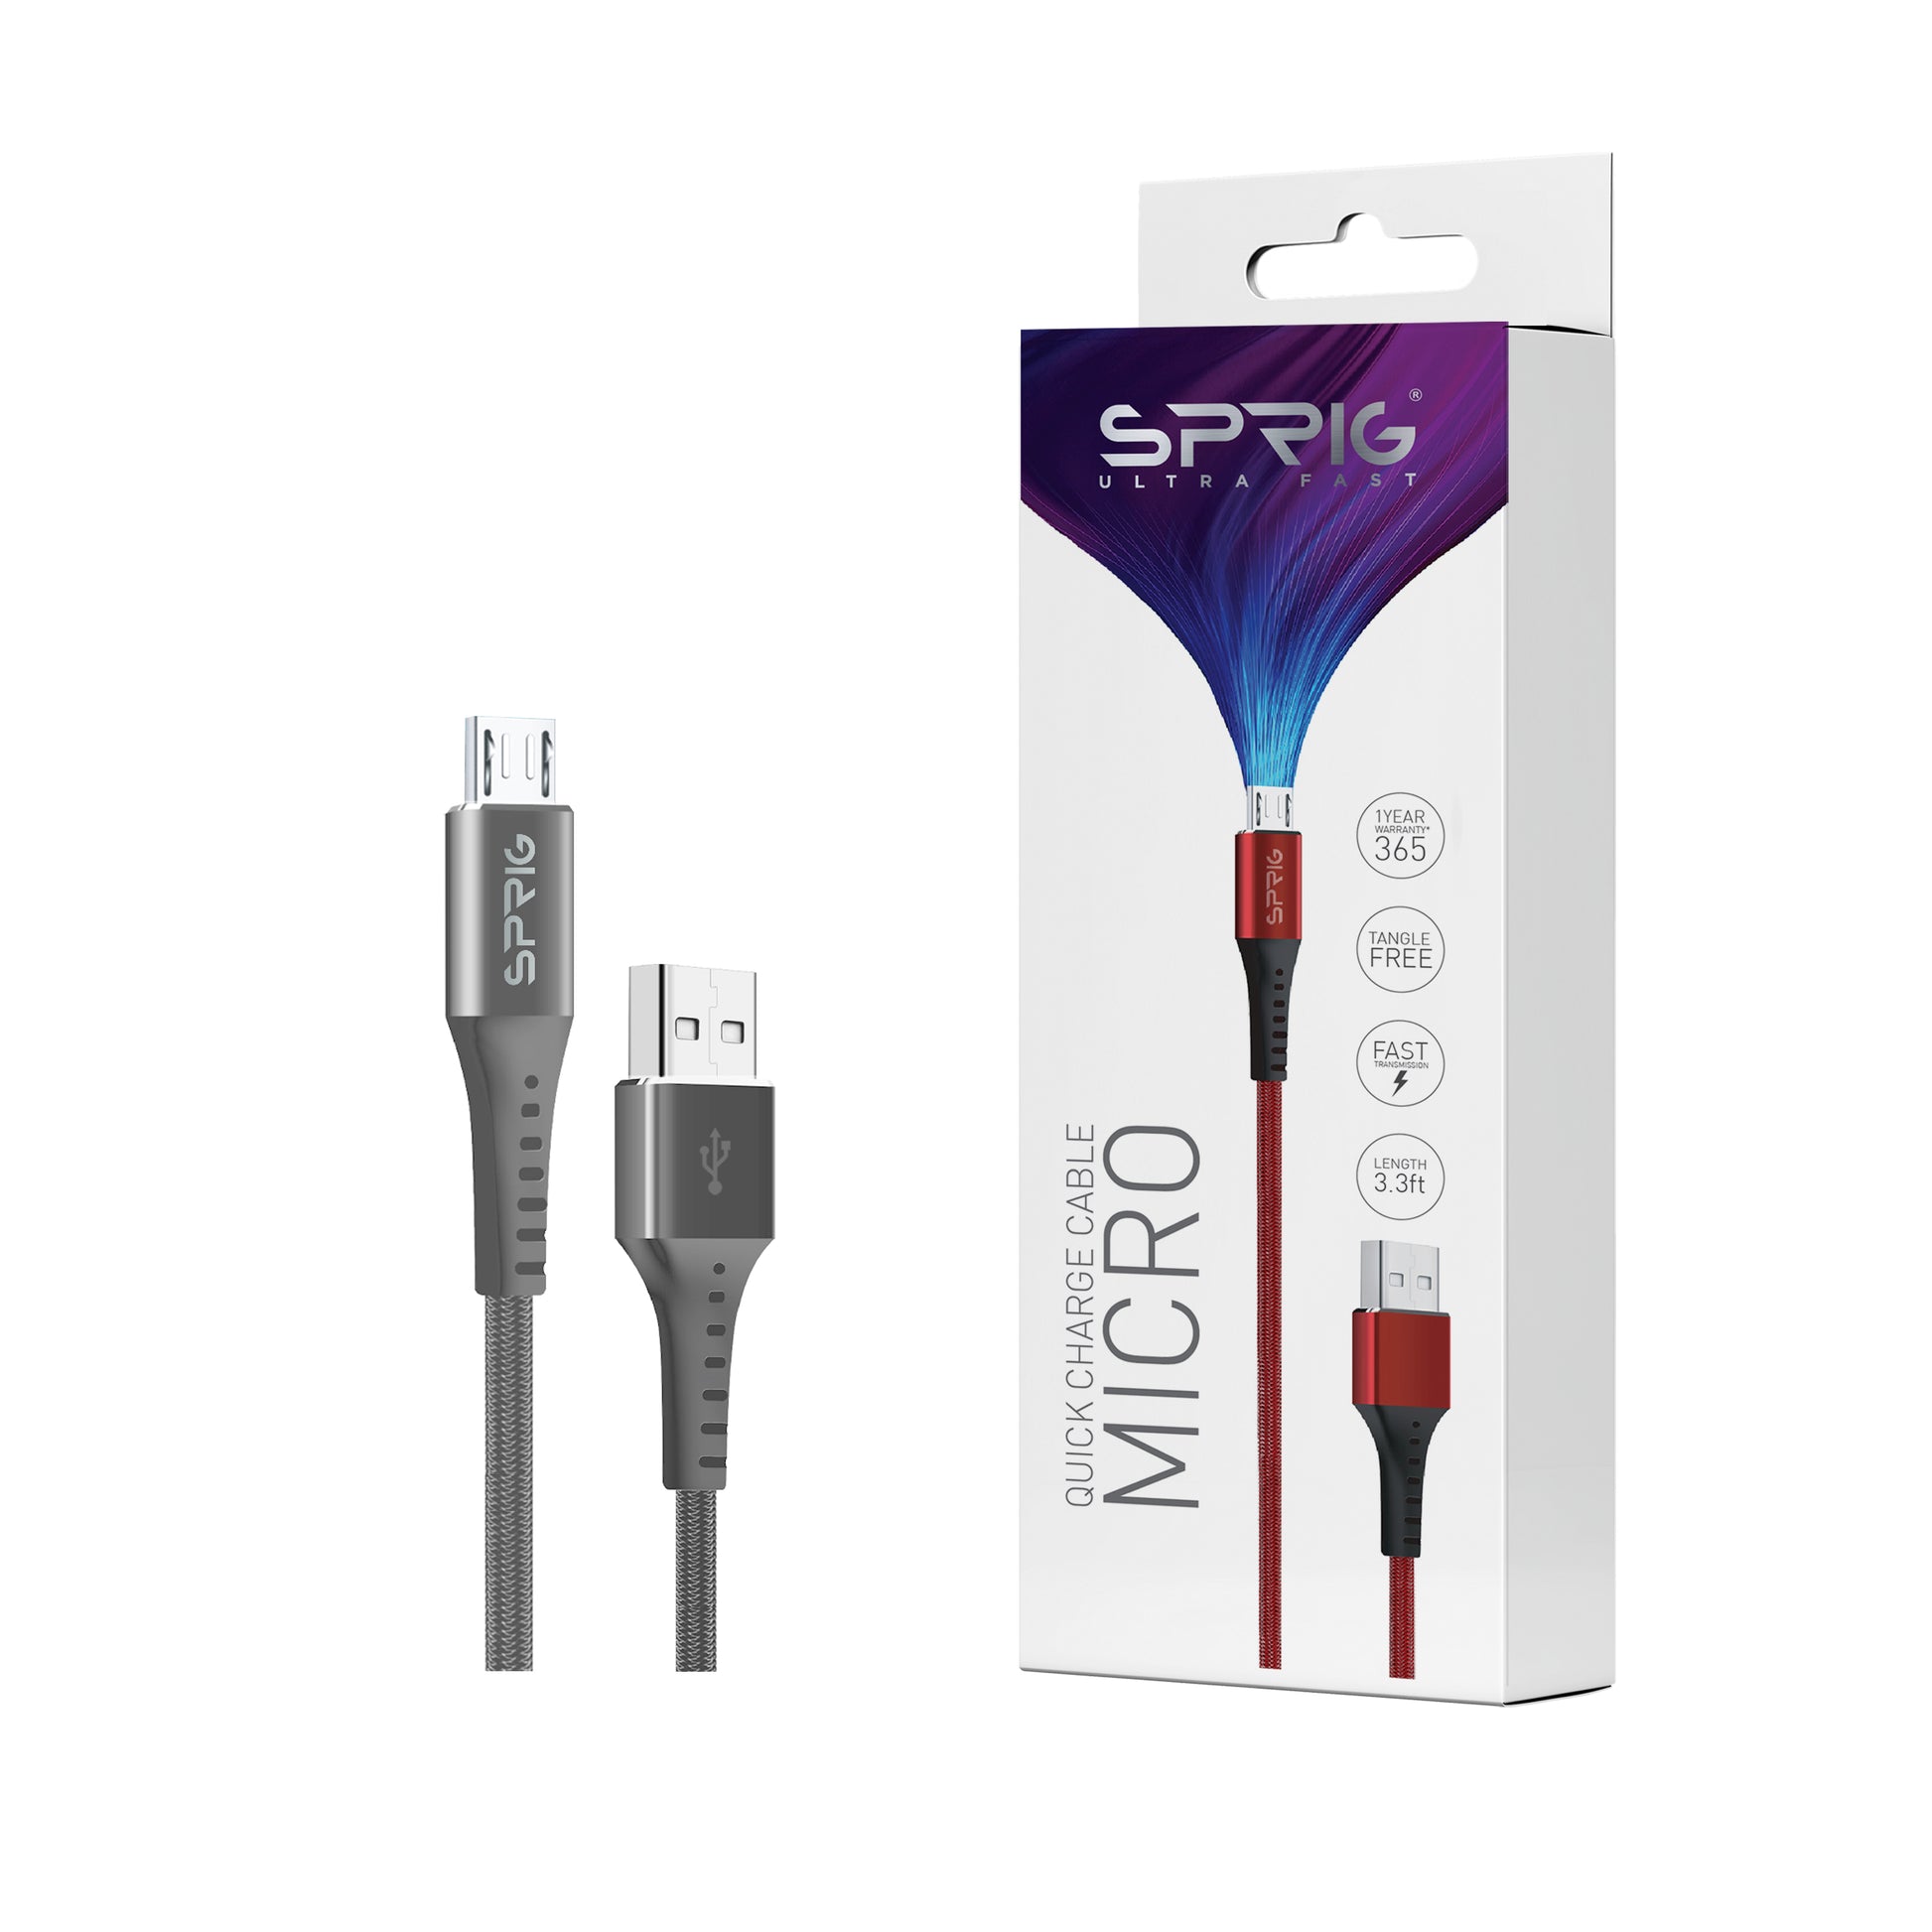 USB Charging Cable by Sprig